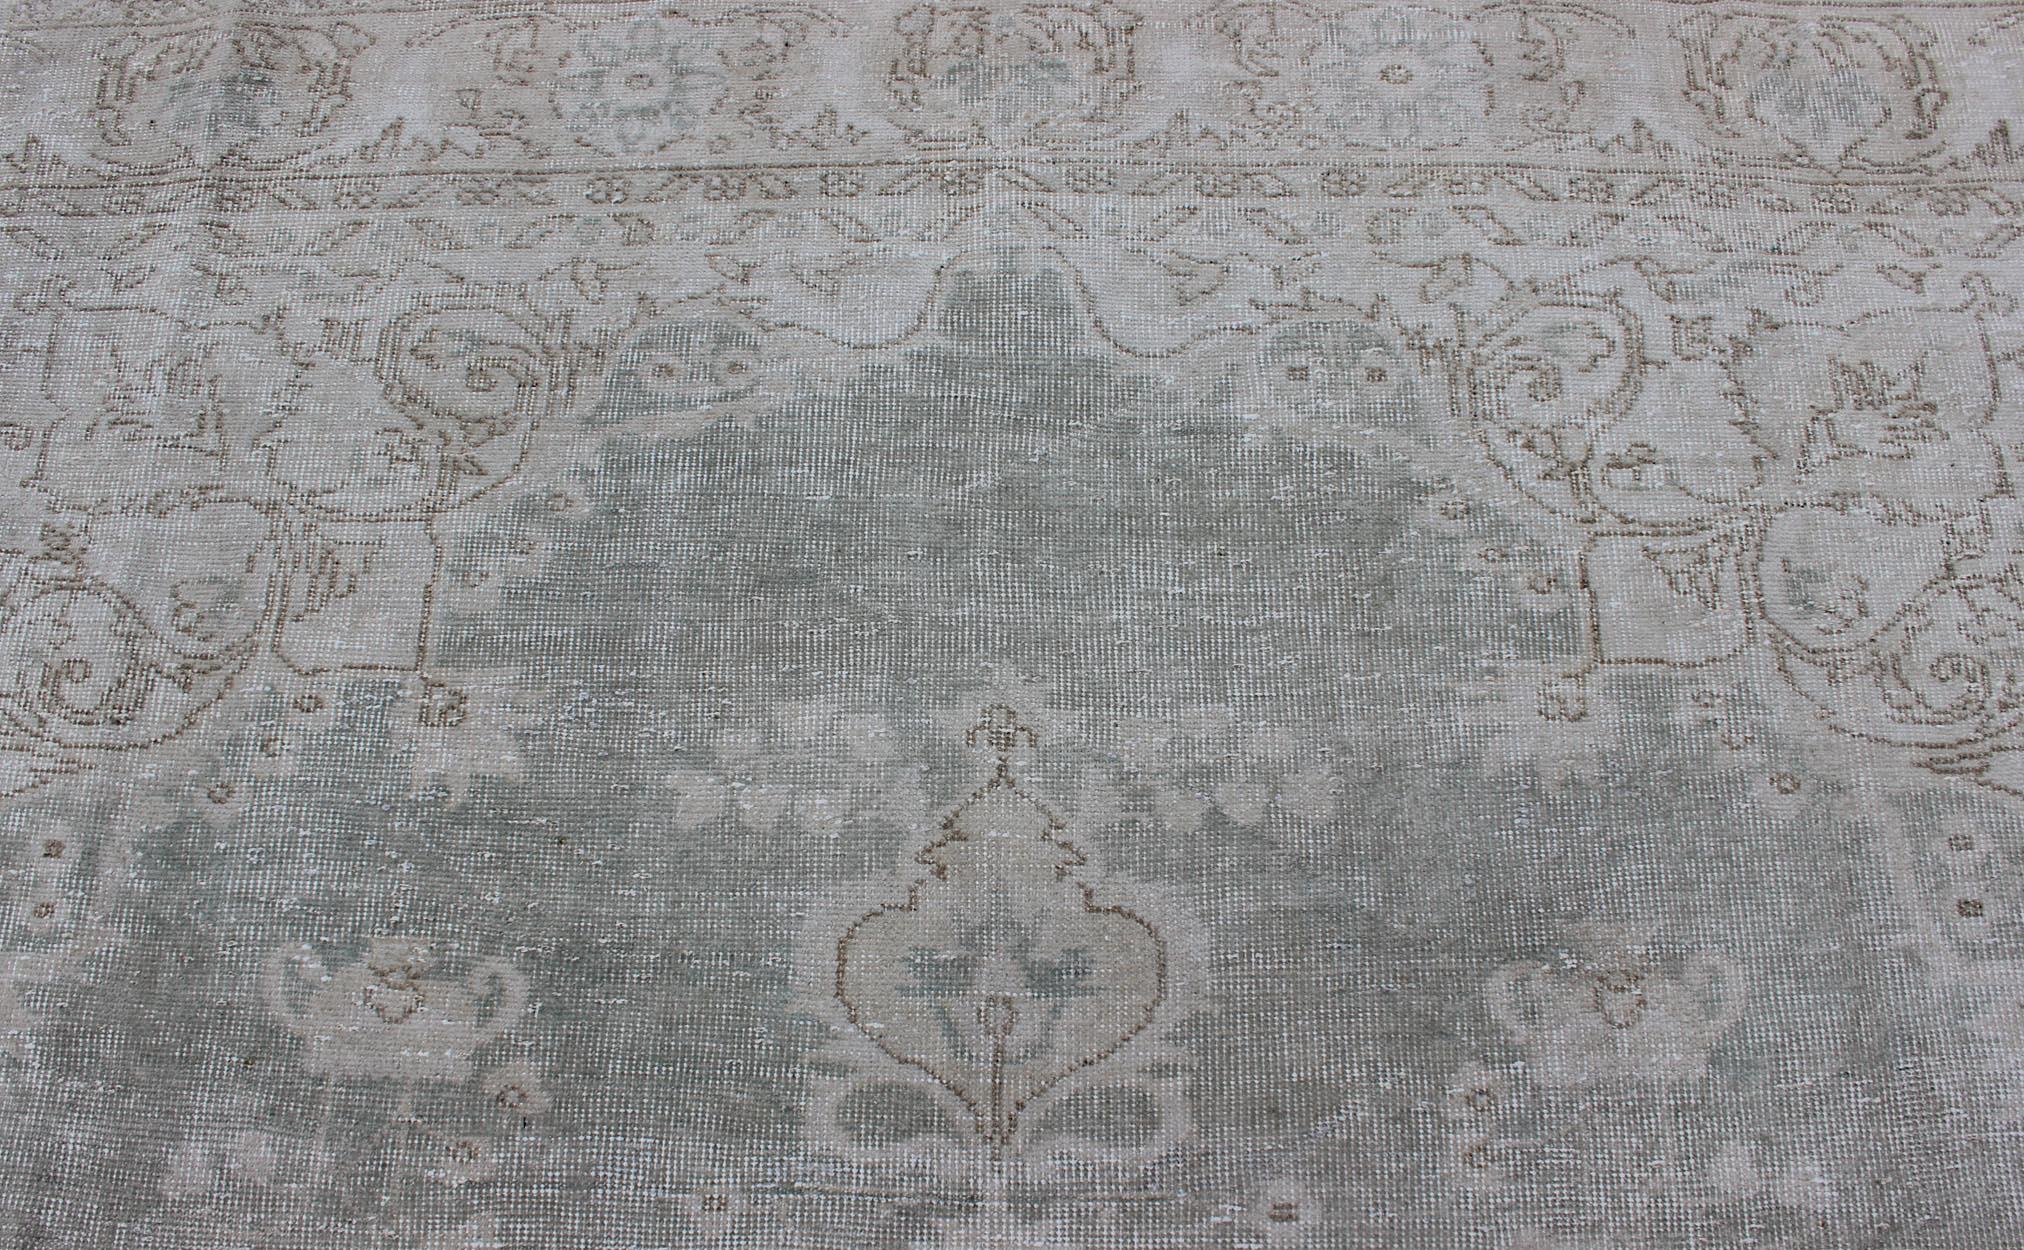 Wool Distressed Turkish Carpet with Floral Design in Gray Green, Brown and Ivory For Sale